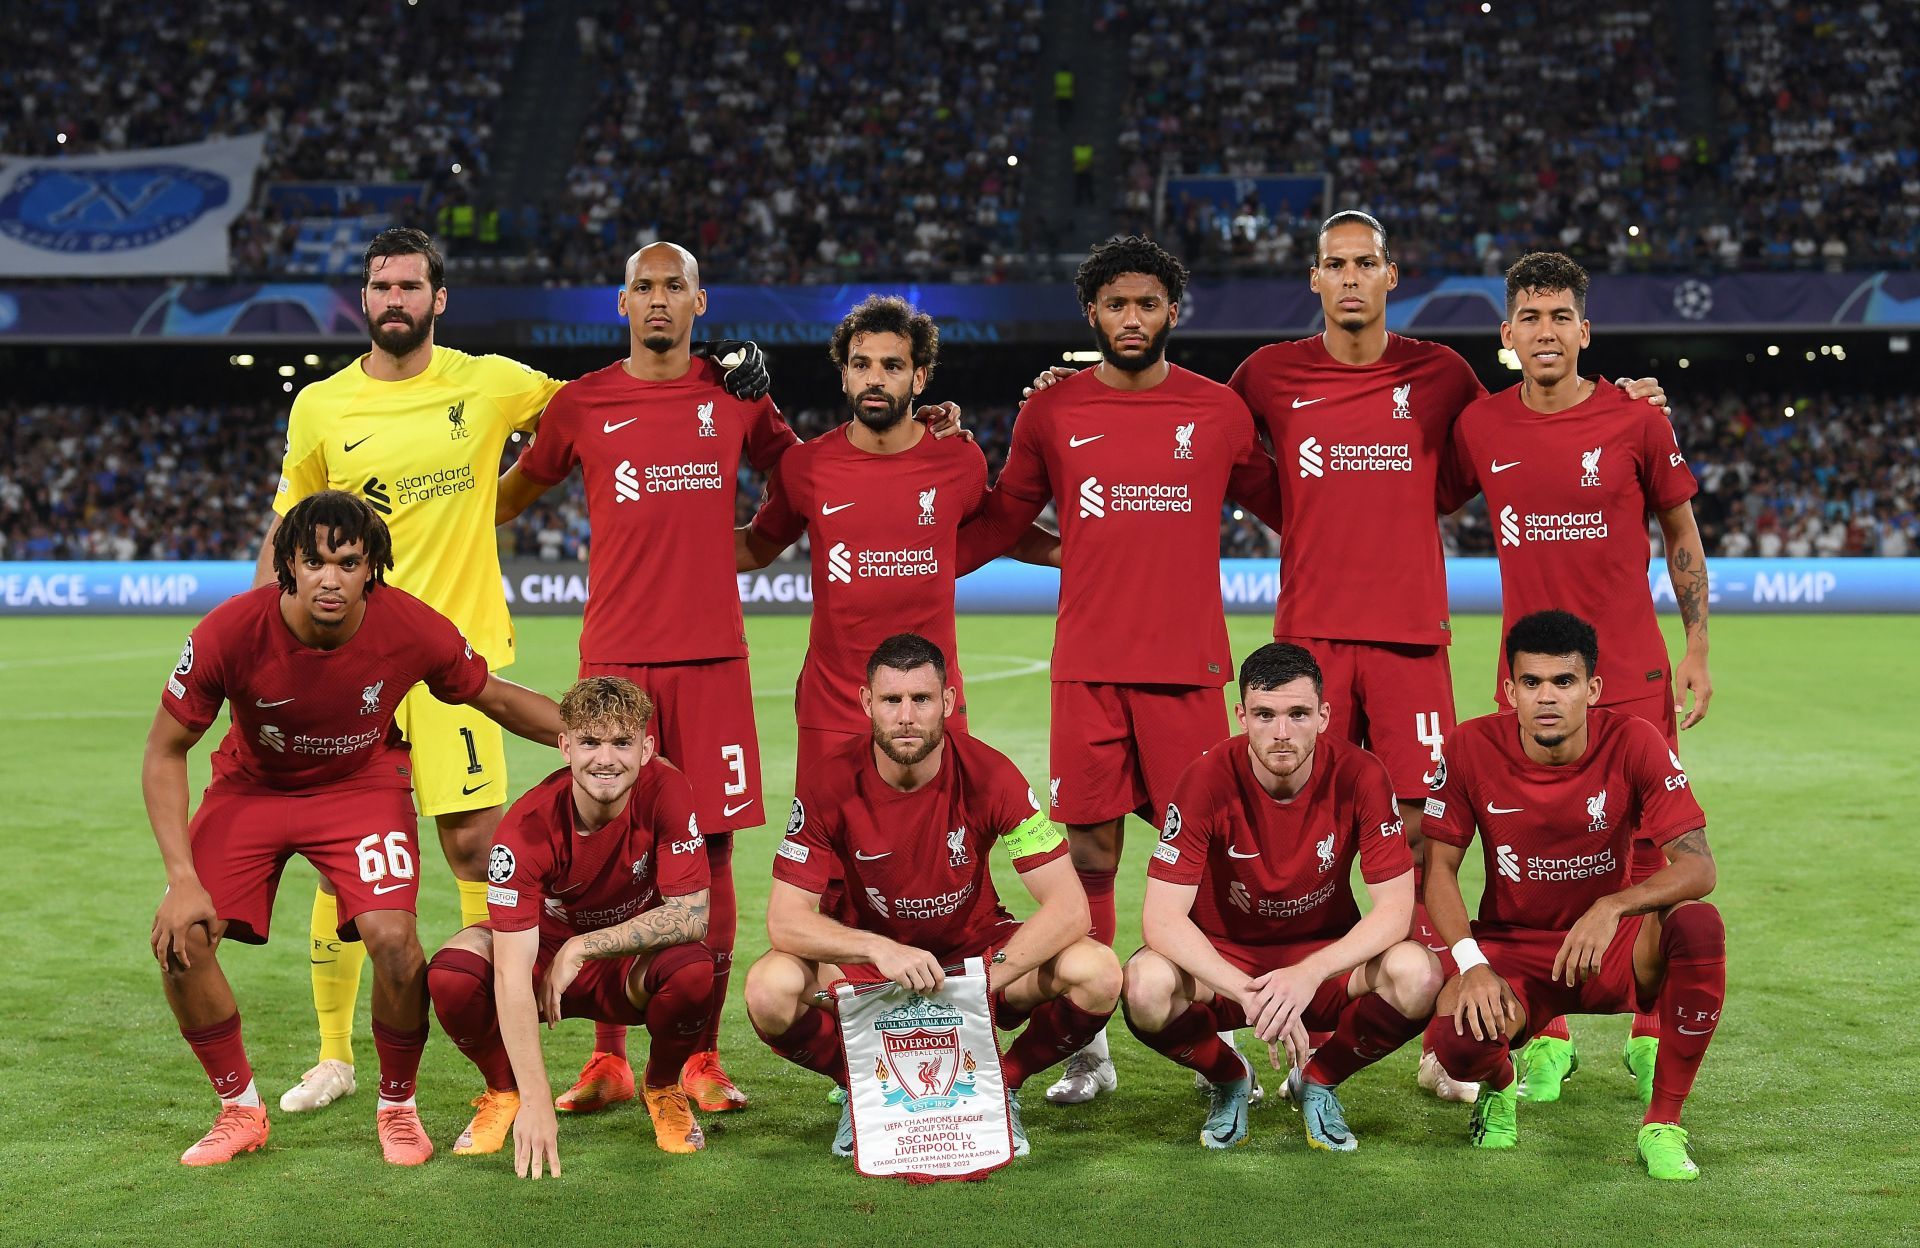 The Reds seem in need of new blood